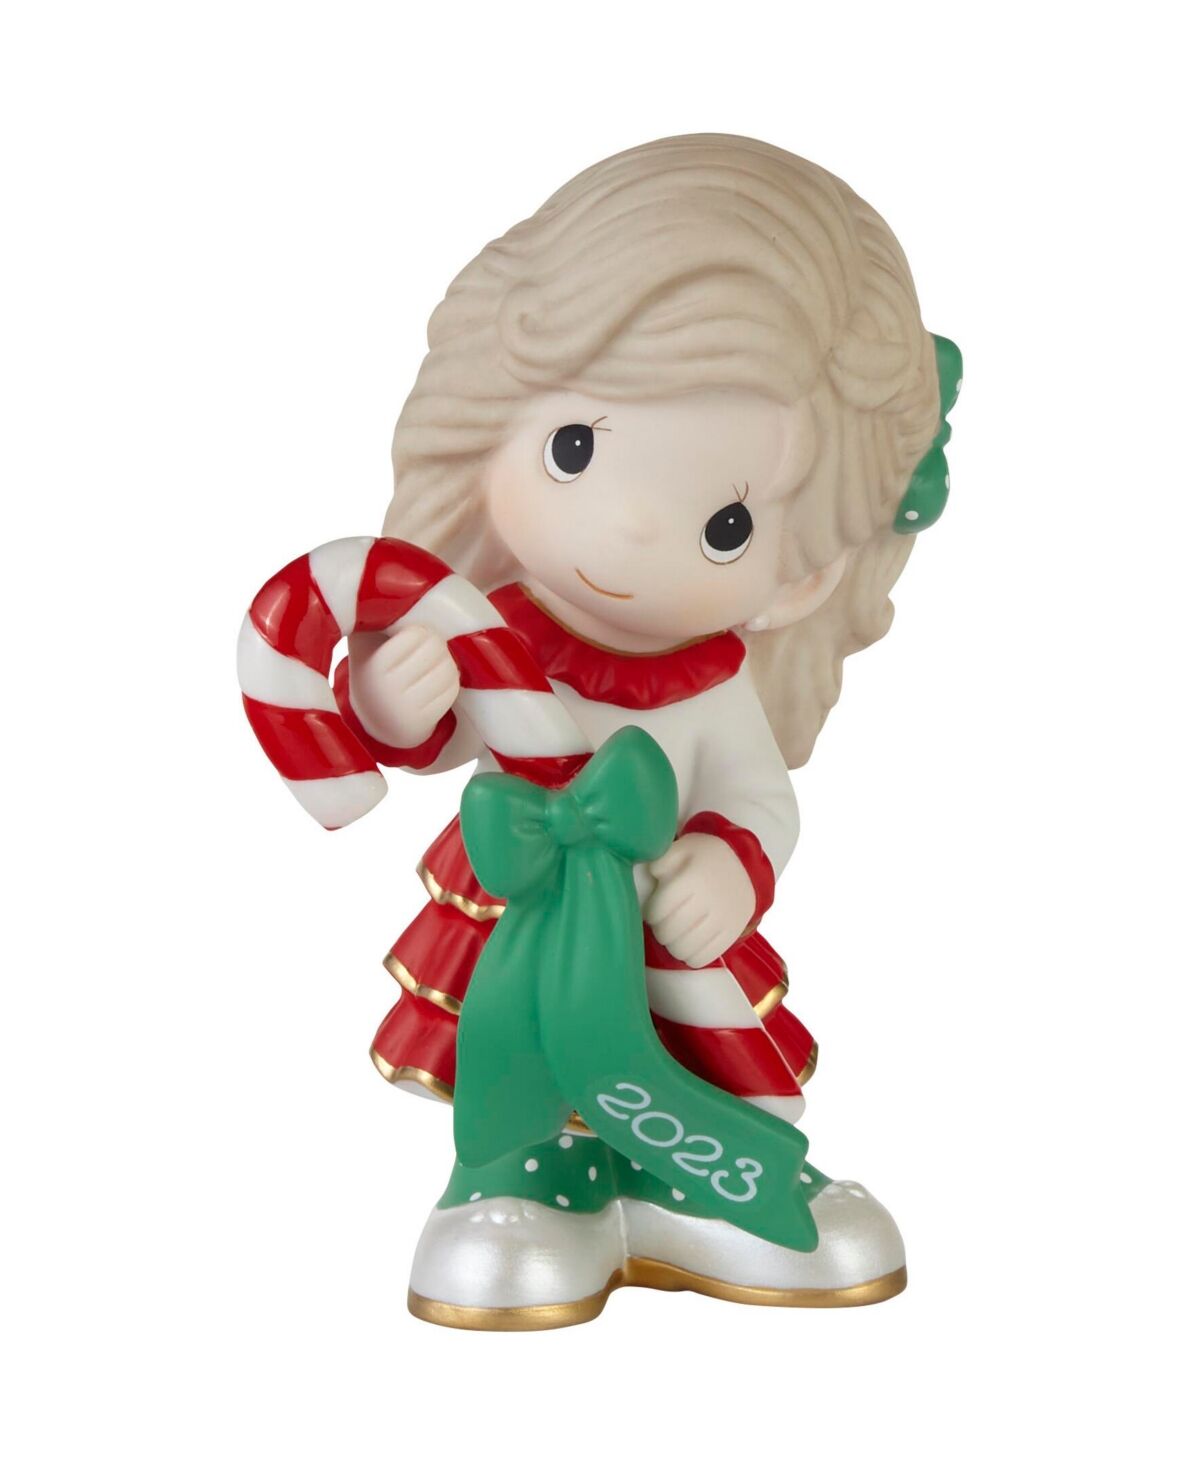 Precious Moments Sweet Christmas Wishes 2023 Dated Bisque Porcelain Figurine - Multicolored